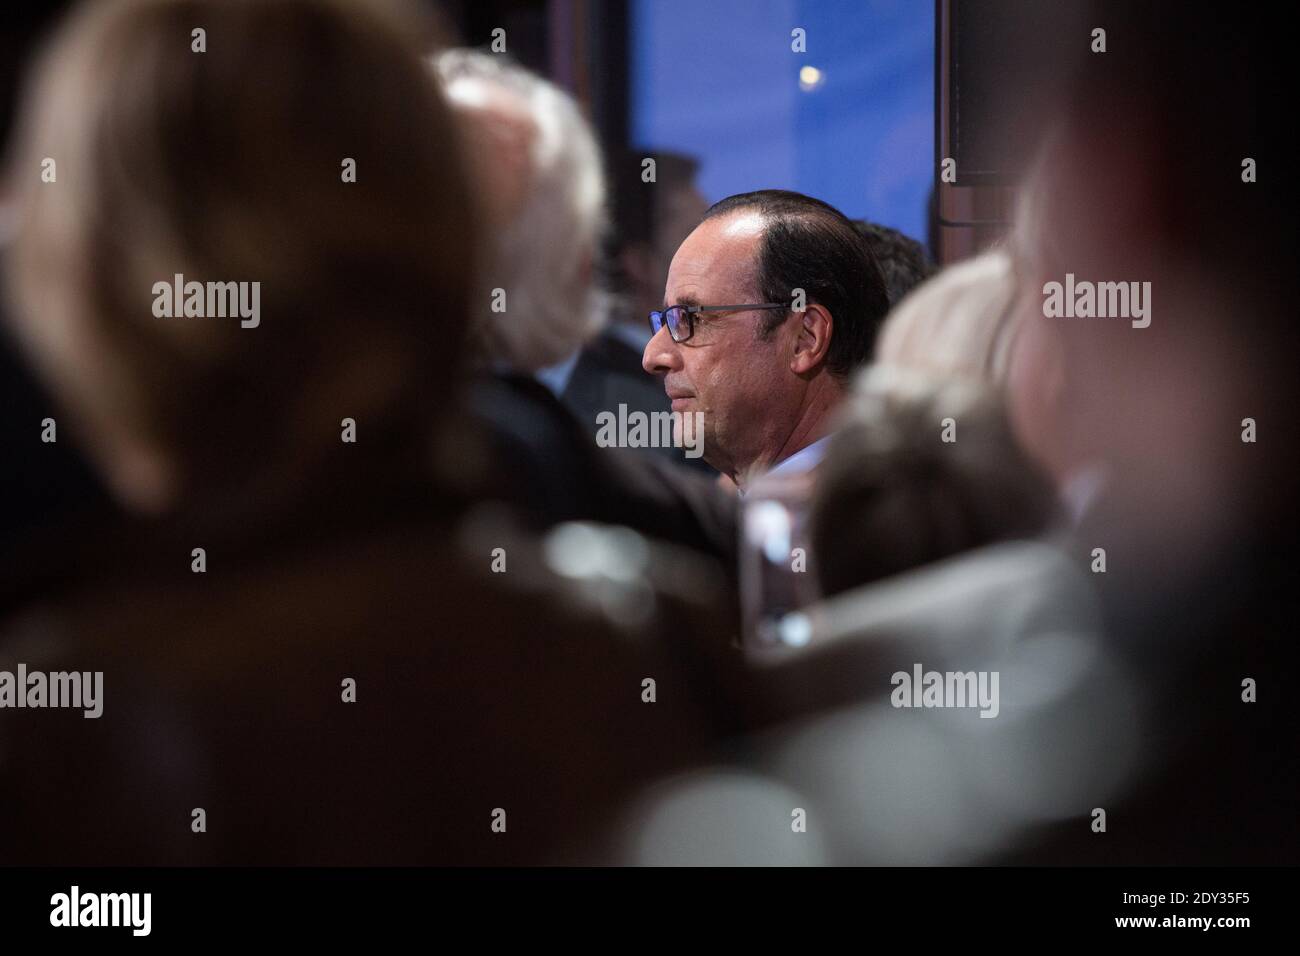 French President Francois Hollande during his visit to the Great Gallery of Evolution at the National museum of natural history in Paris on October 4, 2014. The Great Gallery of Evolution presents 7,000 species from both land and sea, including some extinct species, and celebrates this year its 20th anniversary. Paris, FRANCE - 04/10/2014 Photo by Revelli-Beaumont/ Pool/ ABACAPRESS.COM Stock Photo